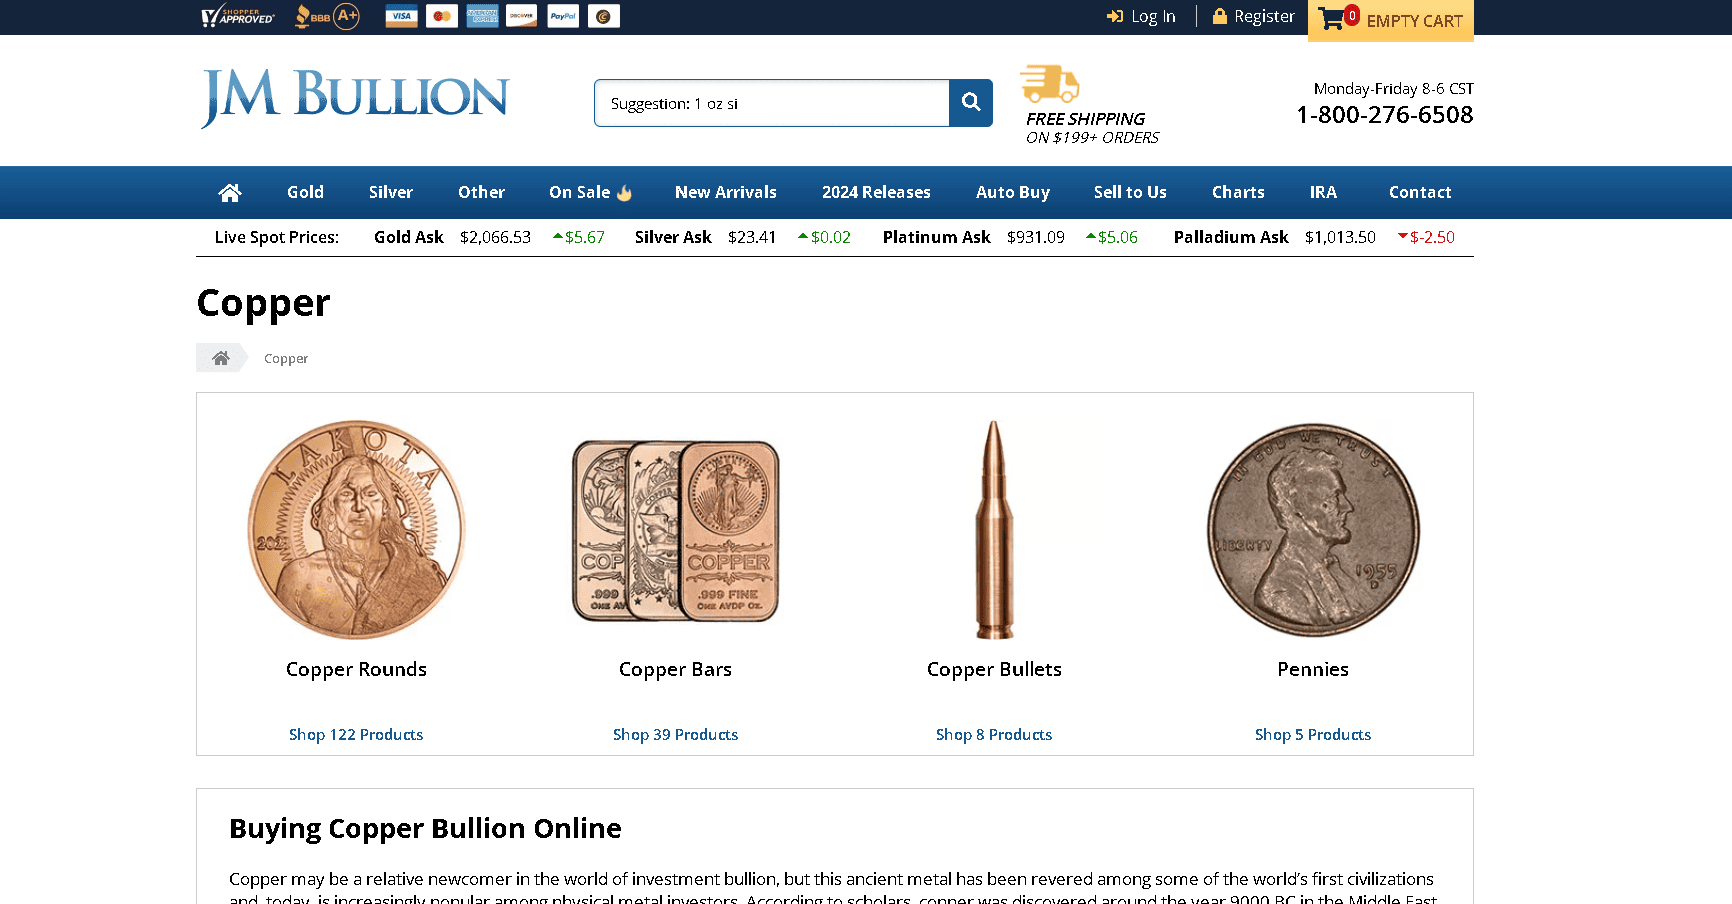 JM Bullion is a rare gold IRA company that sell copper bars and coins